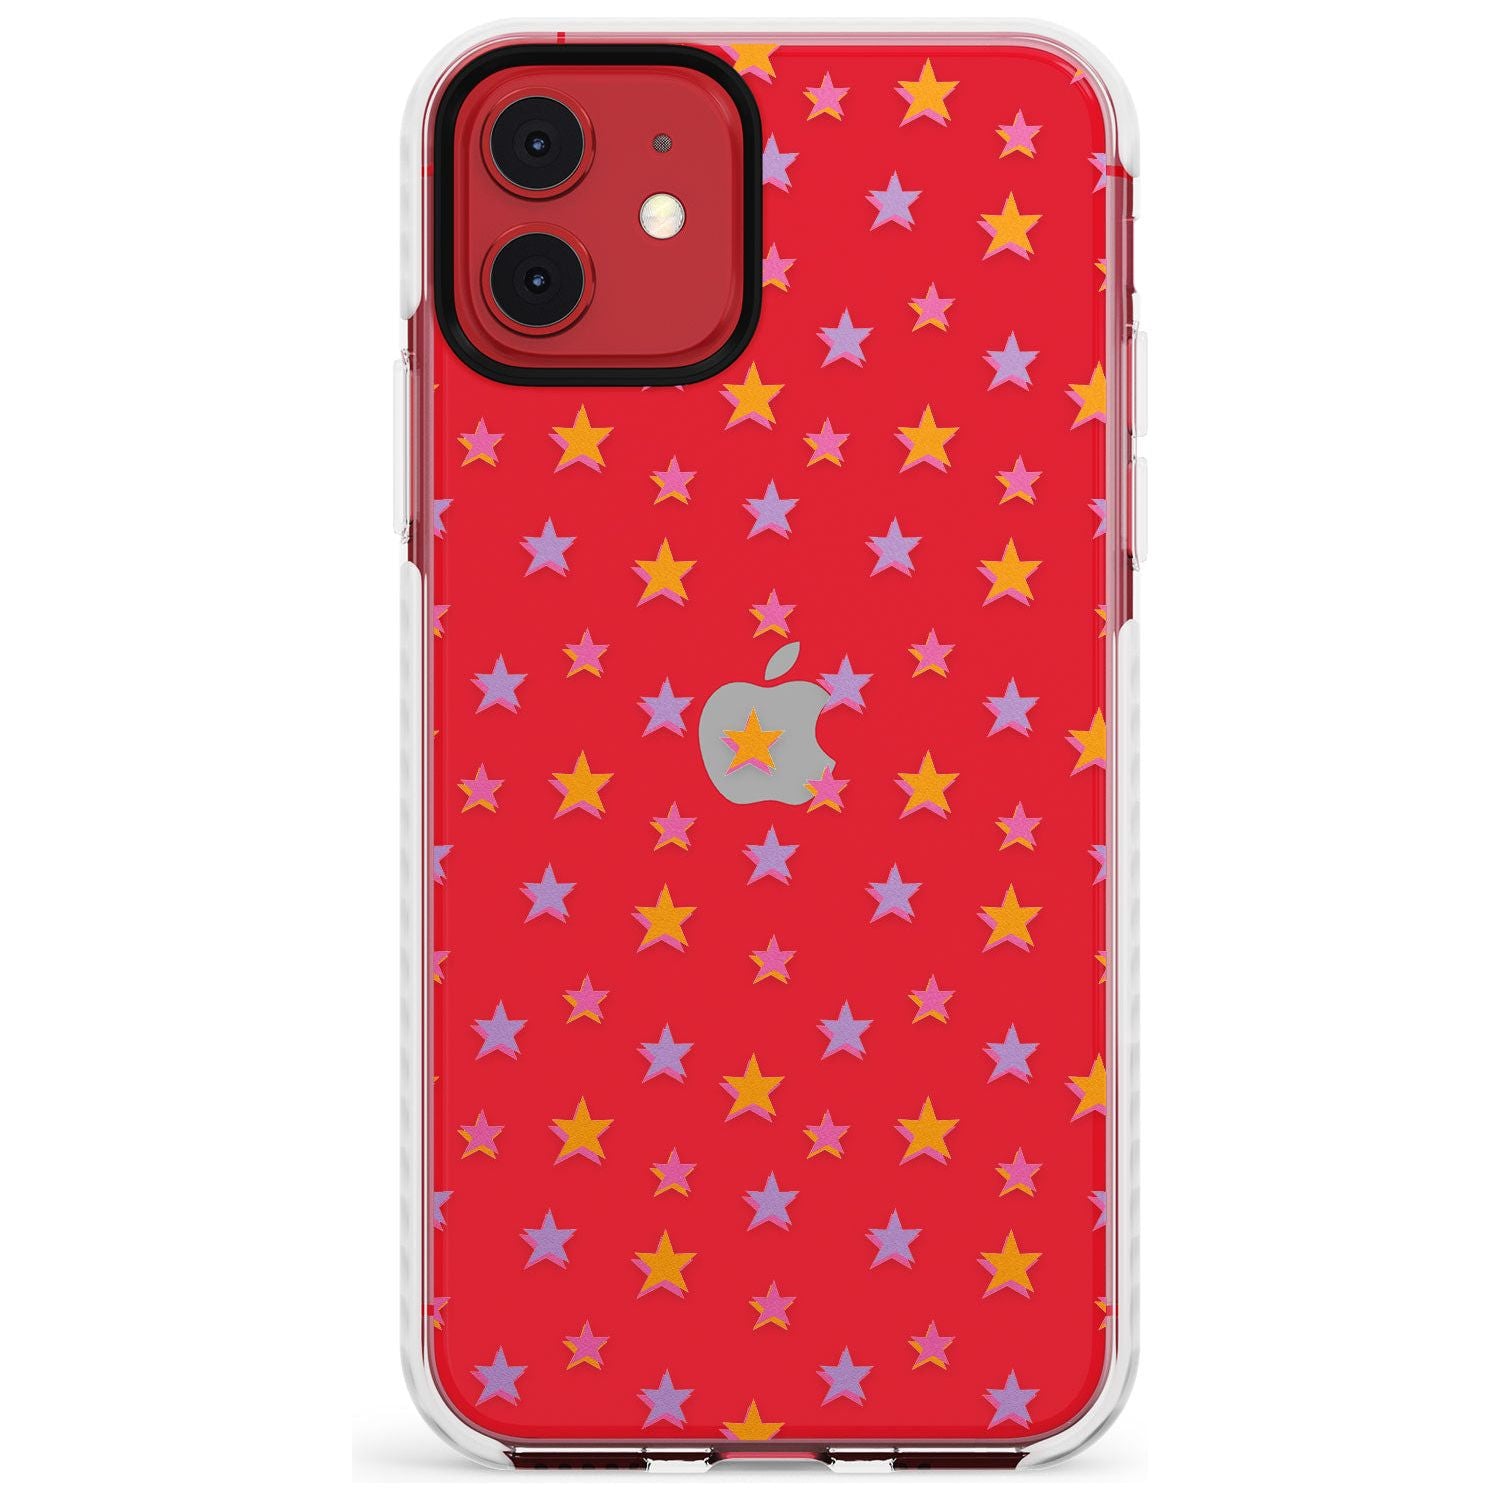 Spangling Stars Pattern Impact Phone Case for iPhone 11